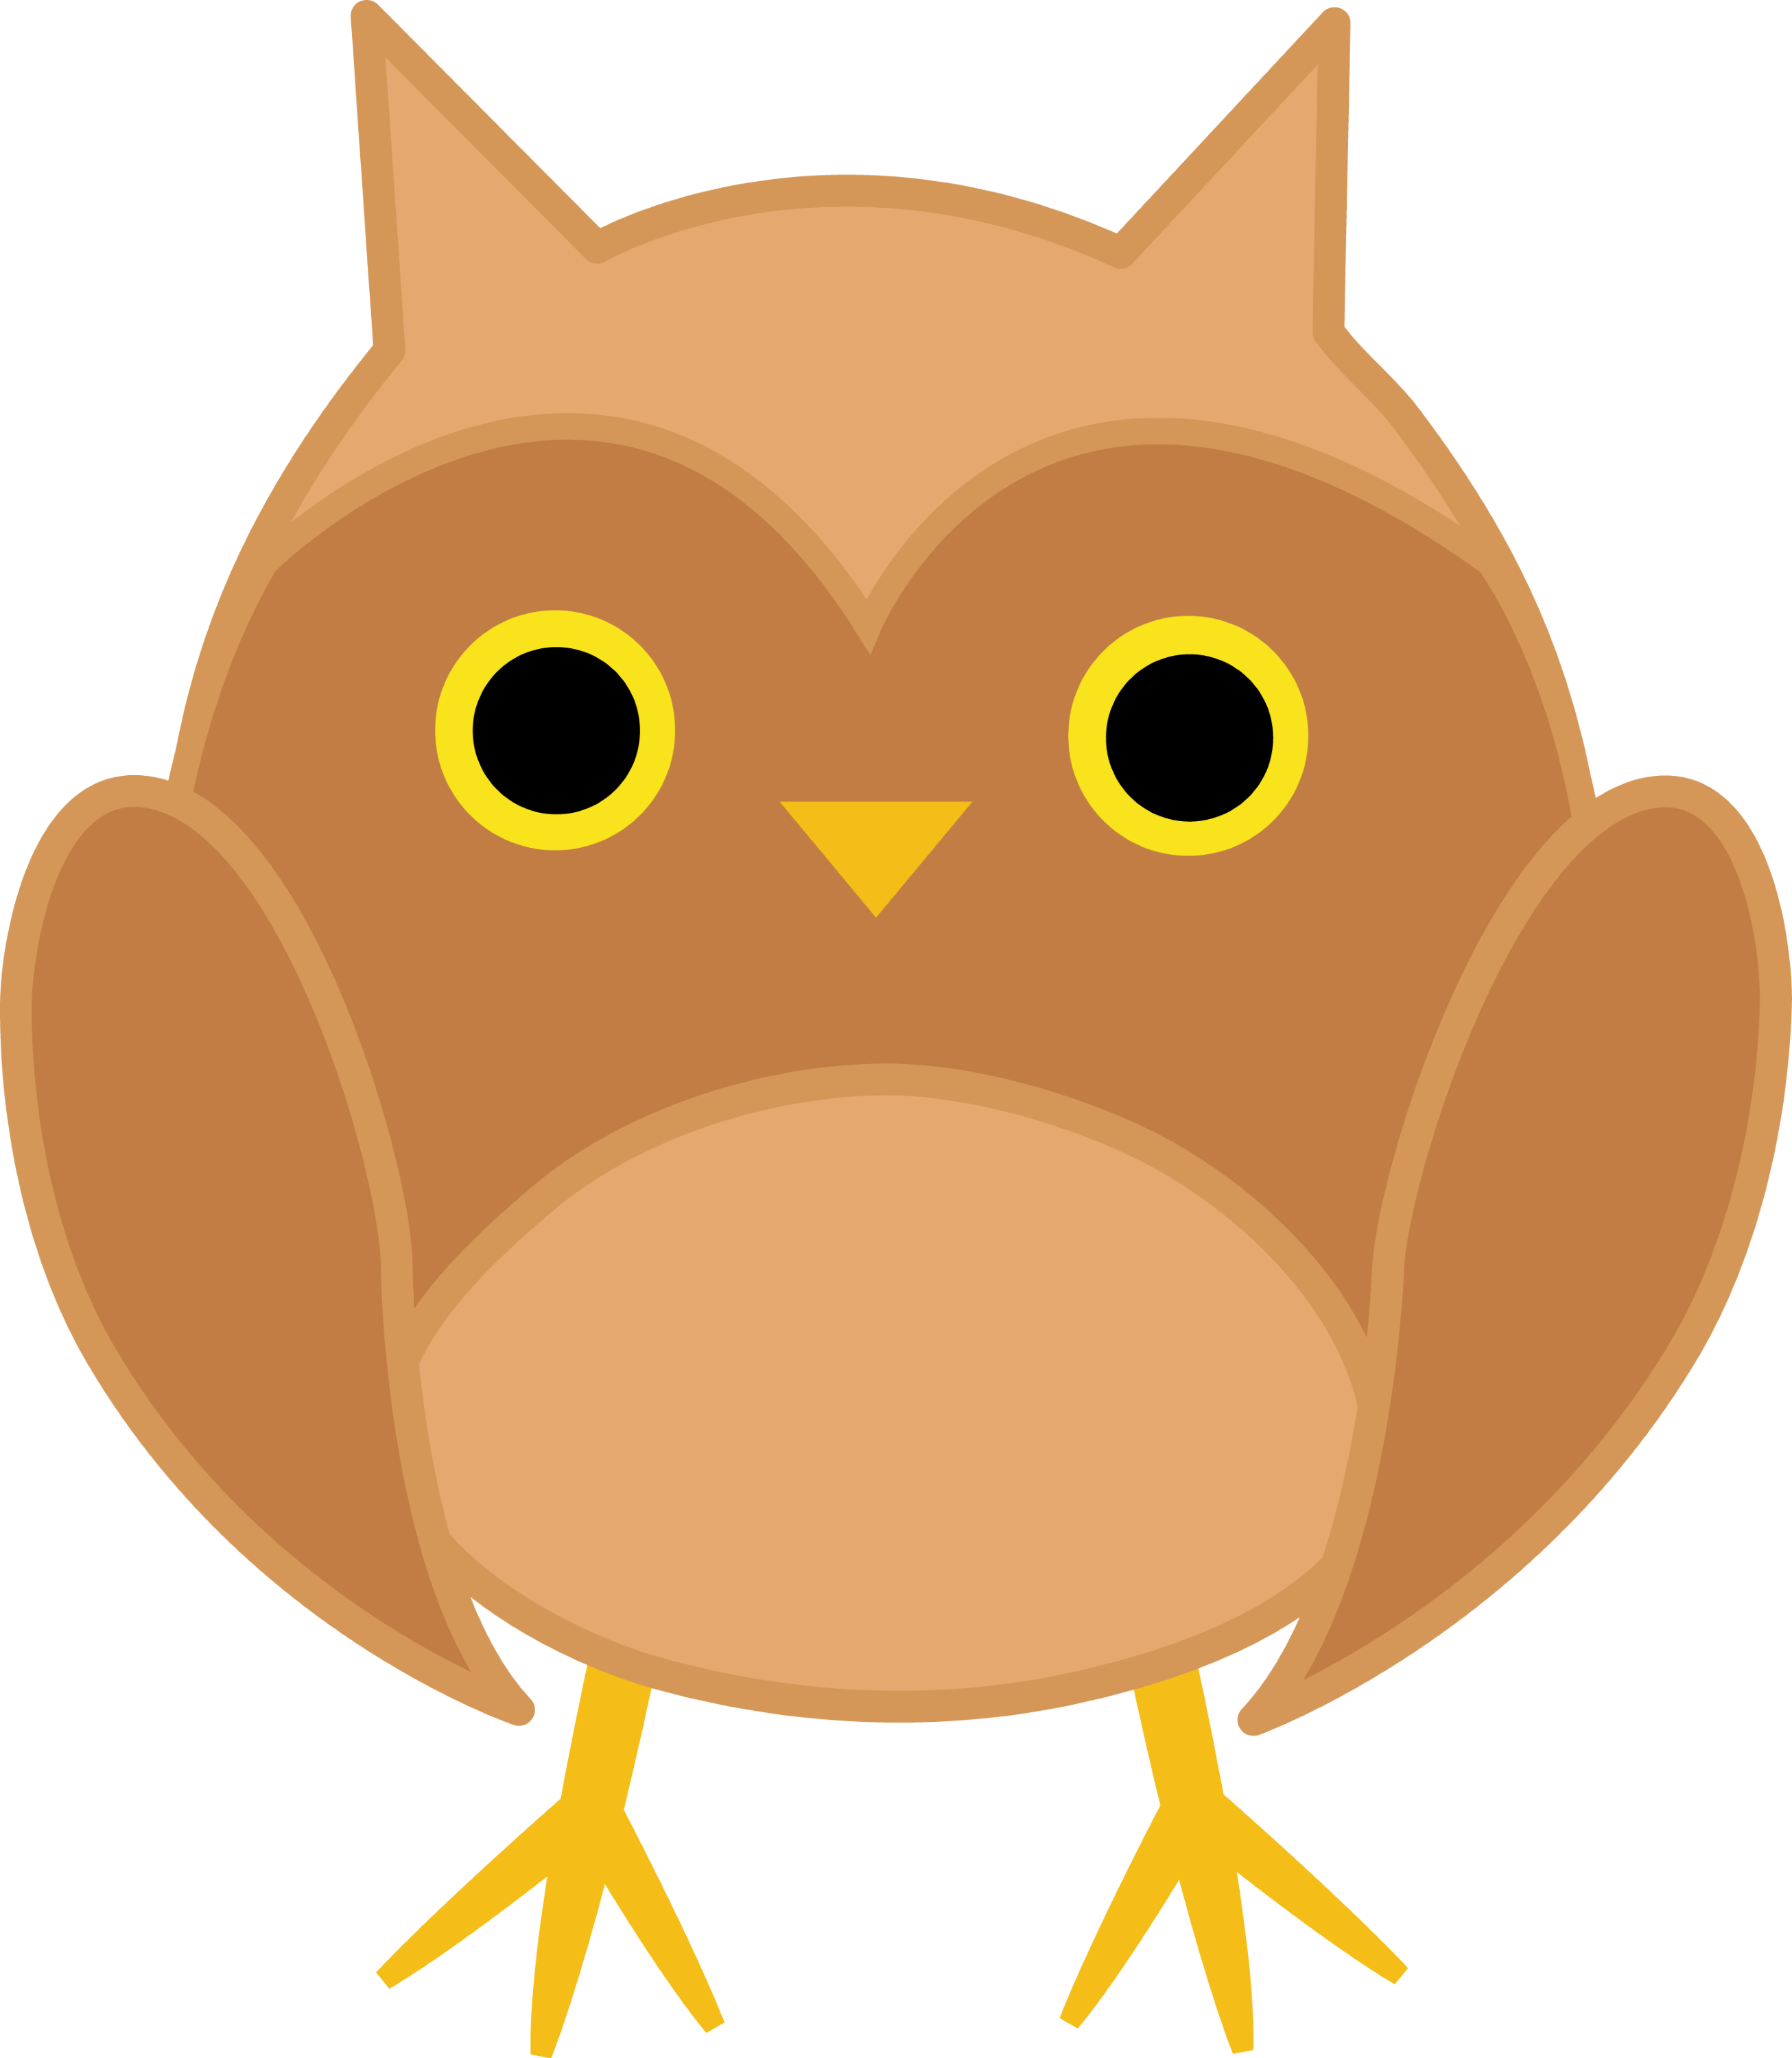 free vector owl clipart - photo #50